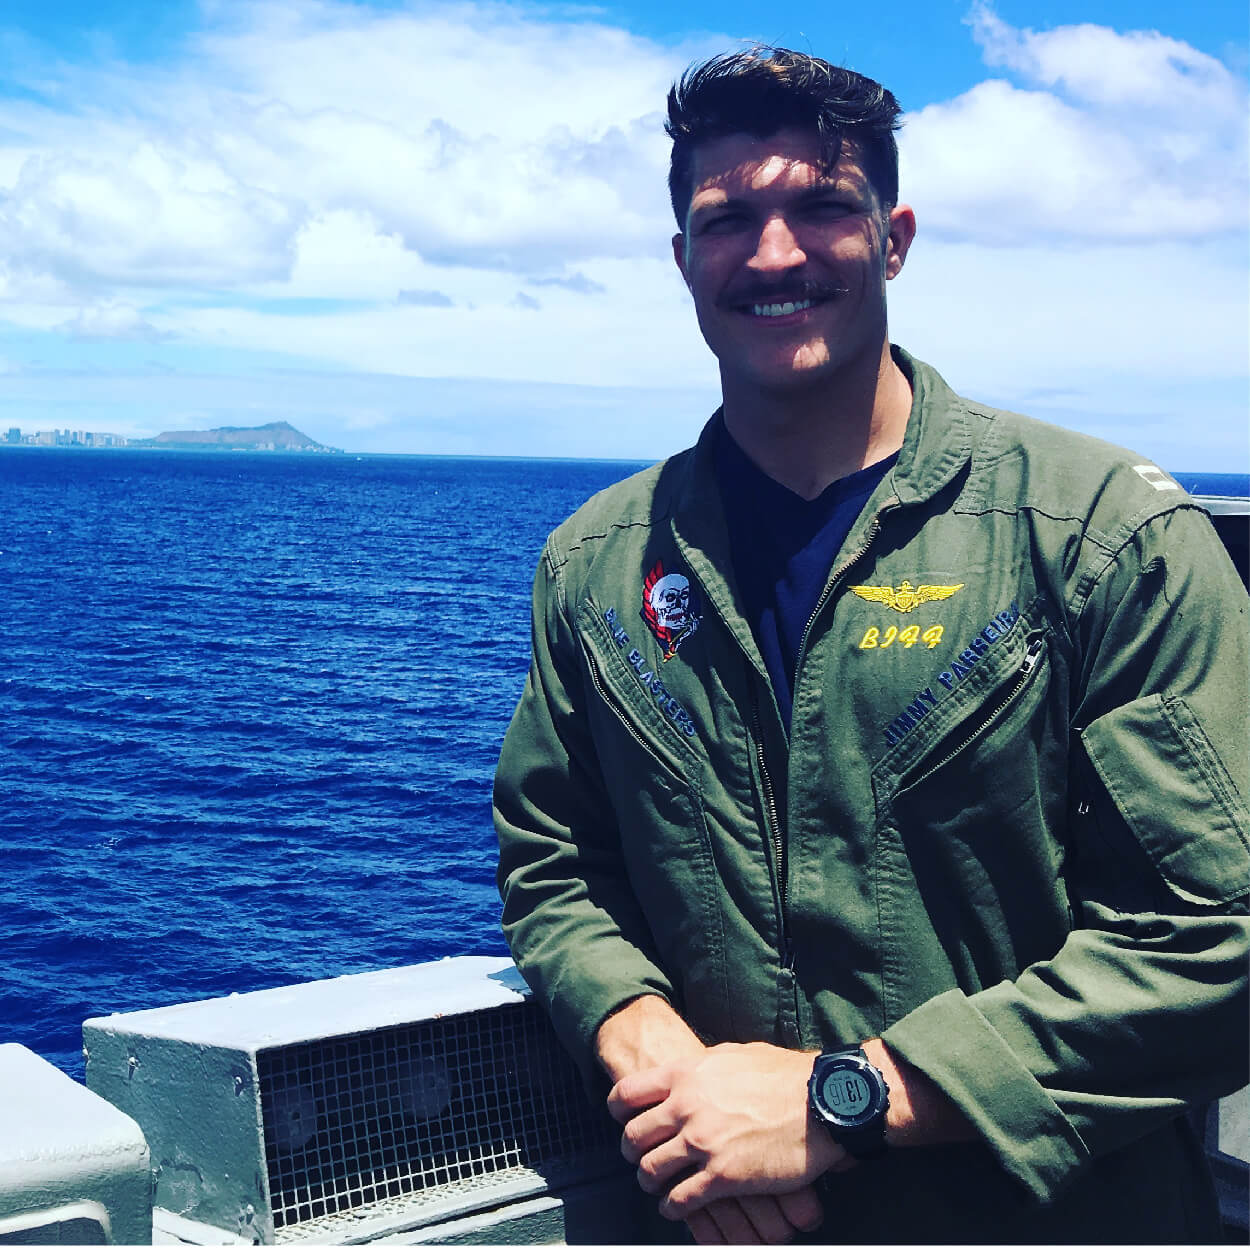 Hangar Bay Spice founder, BIFF out on a ship in the water in his green uniform